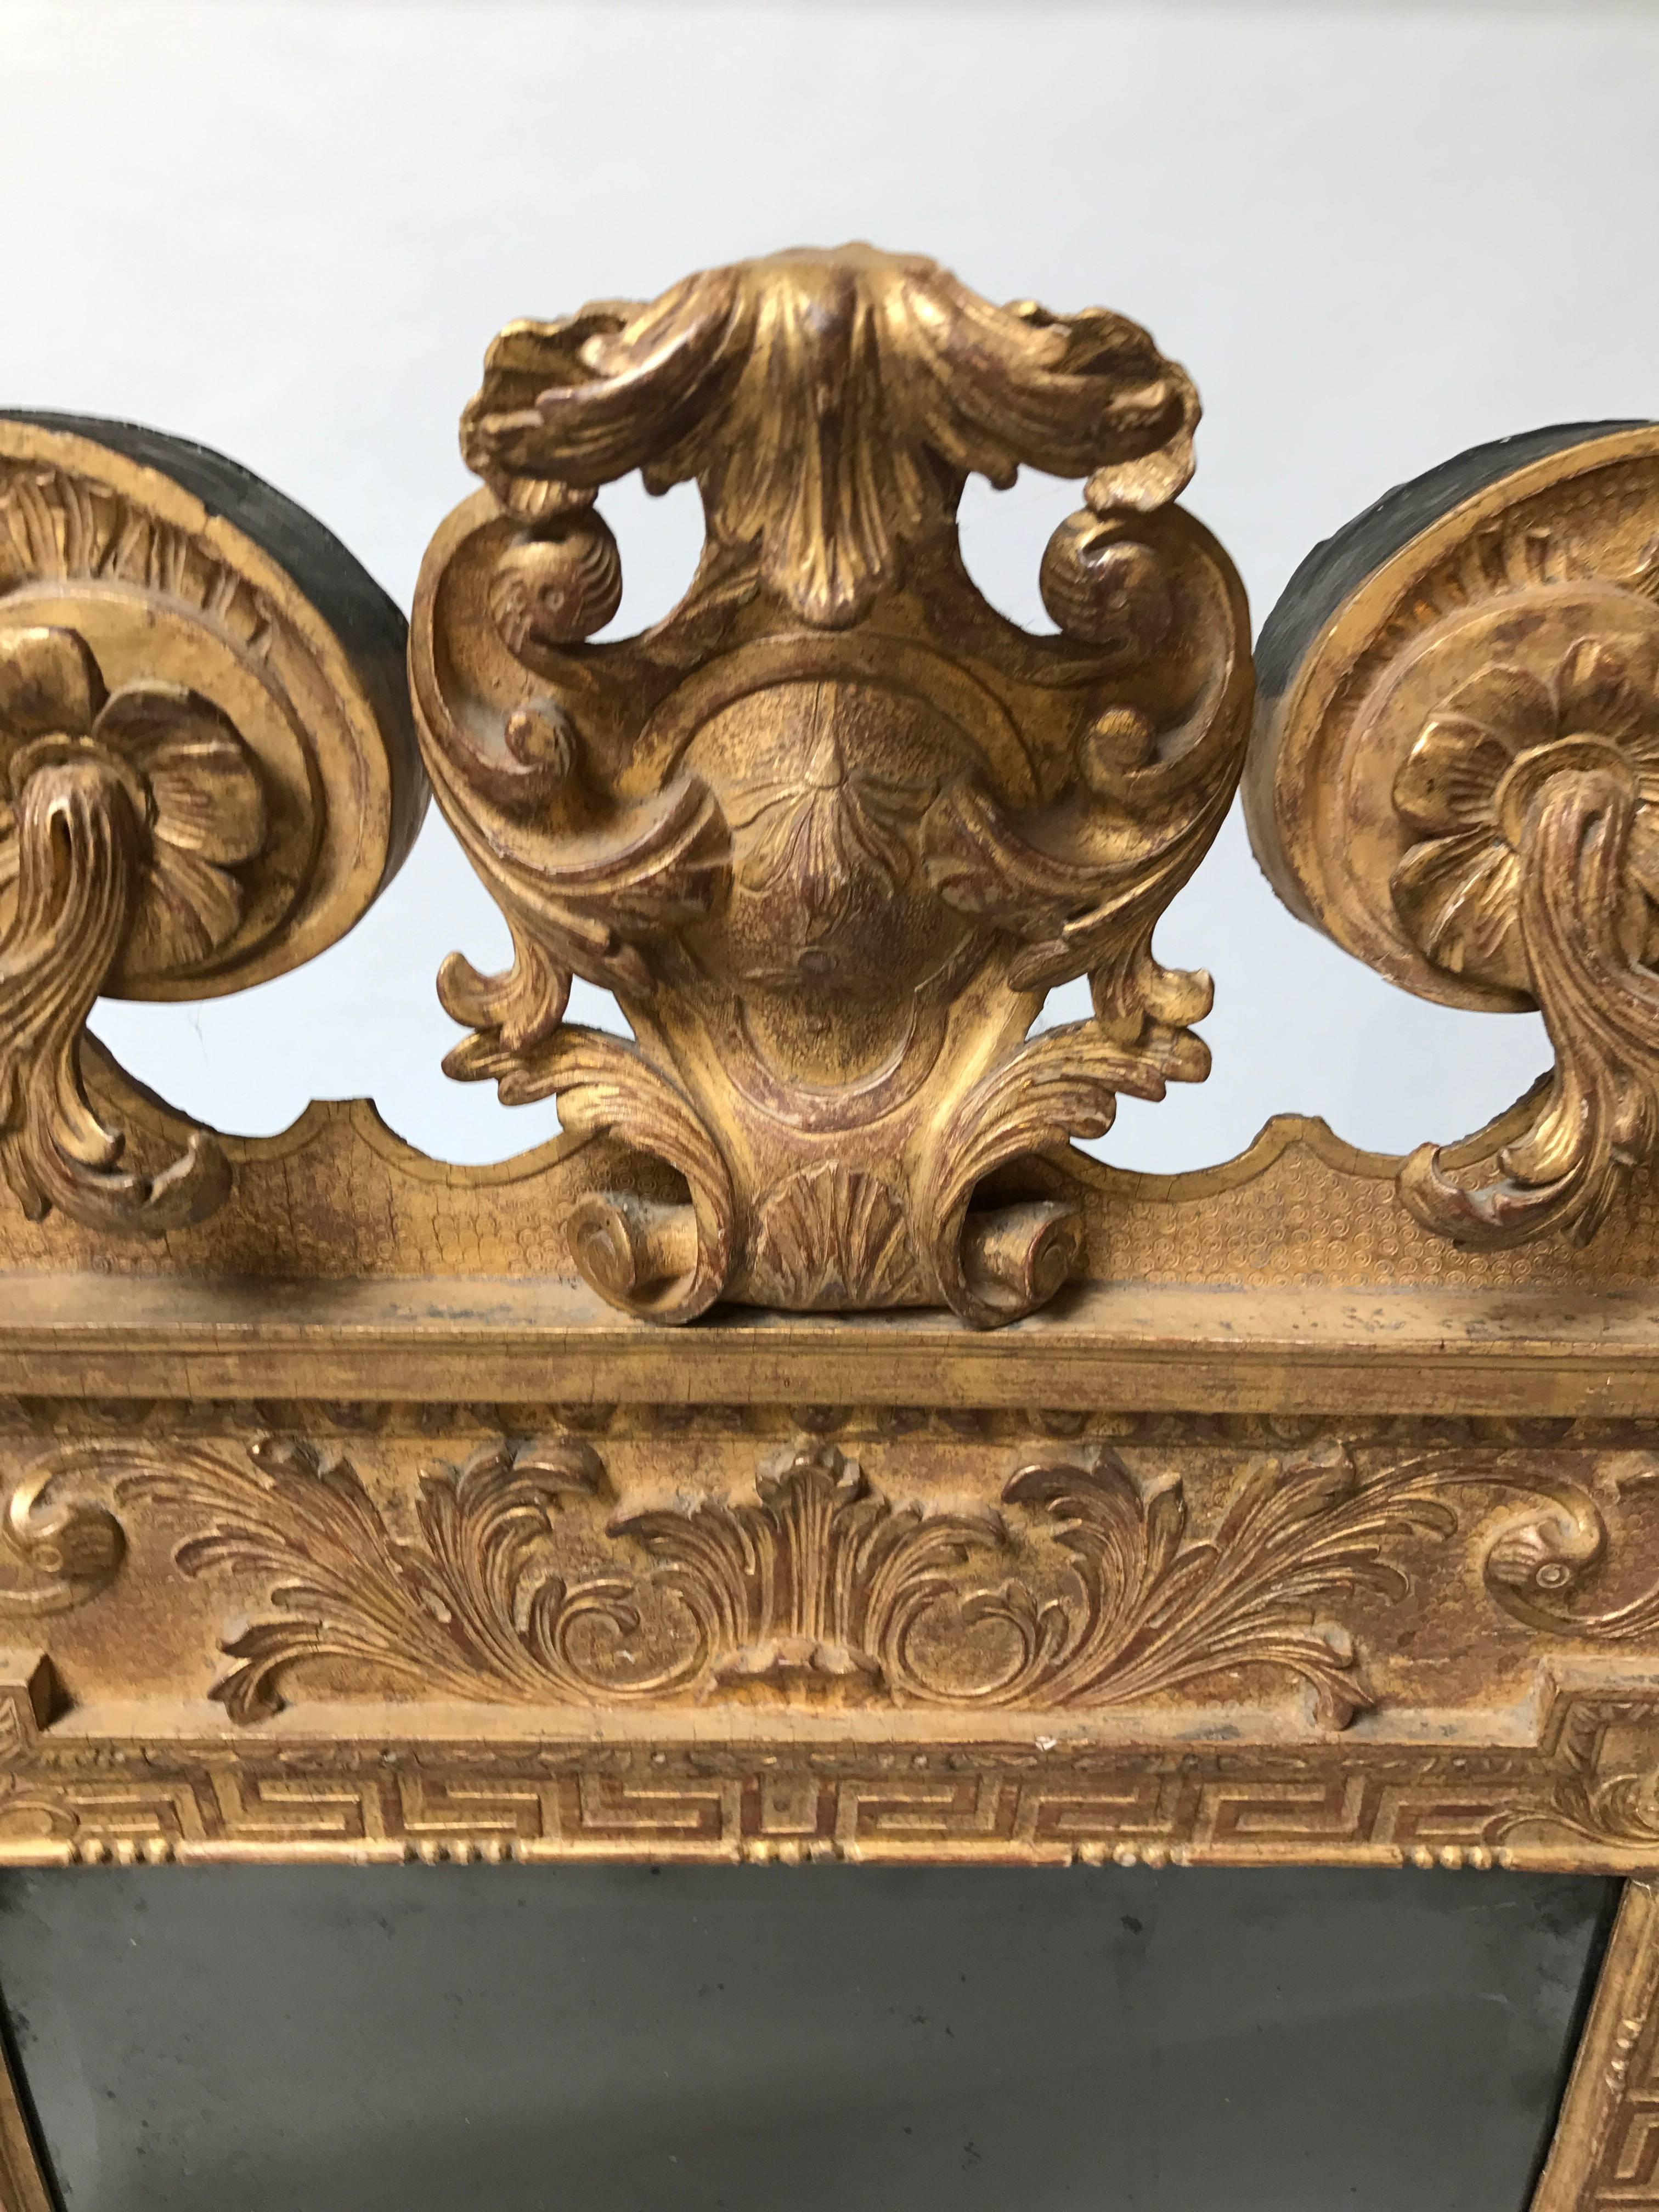 A rare and outstanding period English George II giltwood palladian mirror with period beveled glass and minor gilt restoration, crowned with a spectacular broken pediment, adorned with carved acanthus leaves, Greek key decoration and sides with